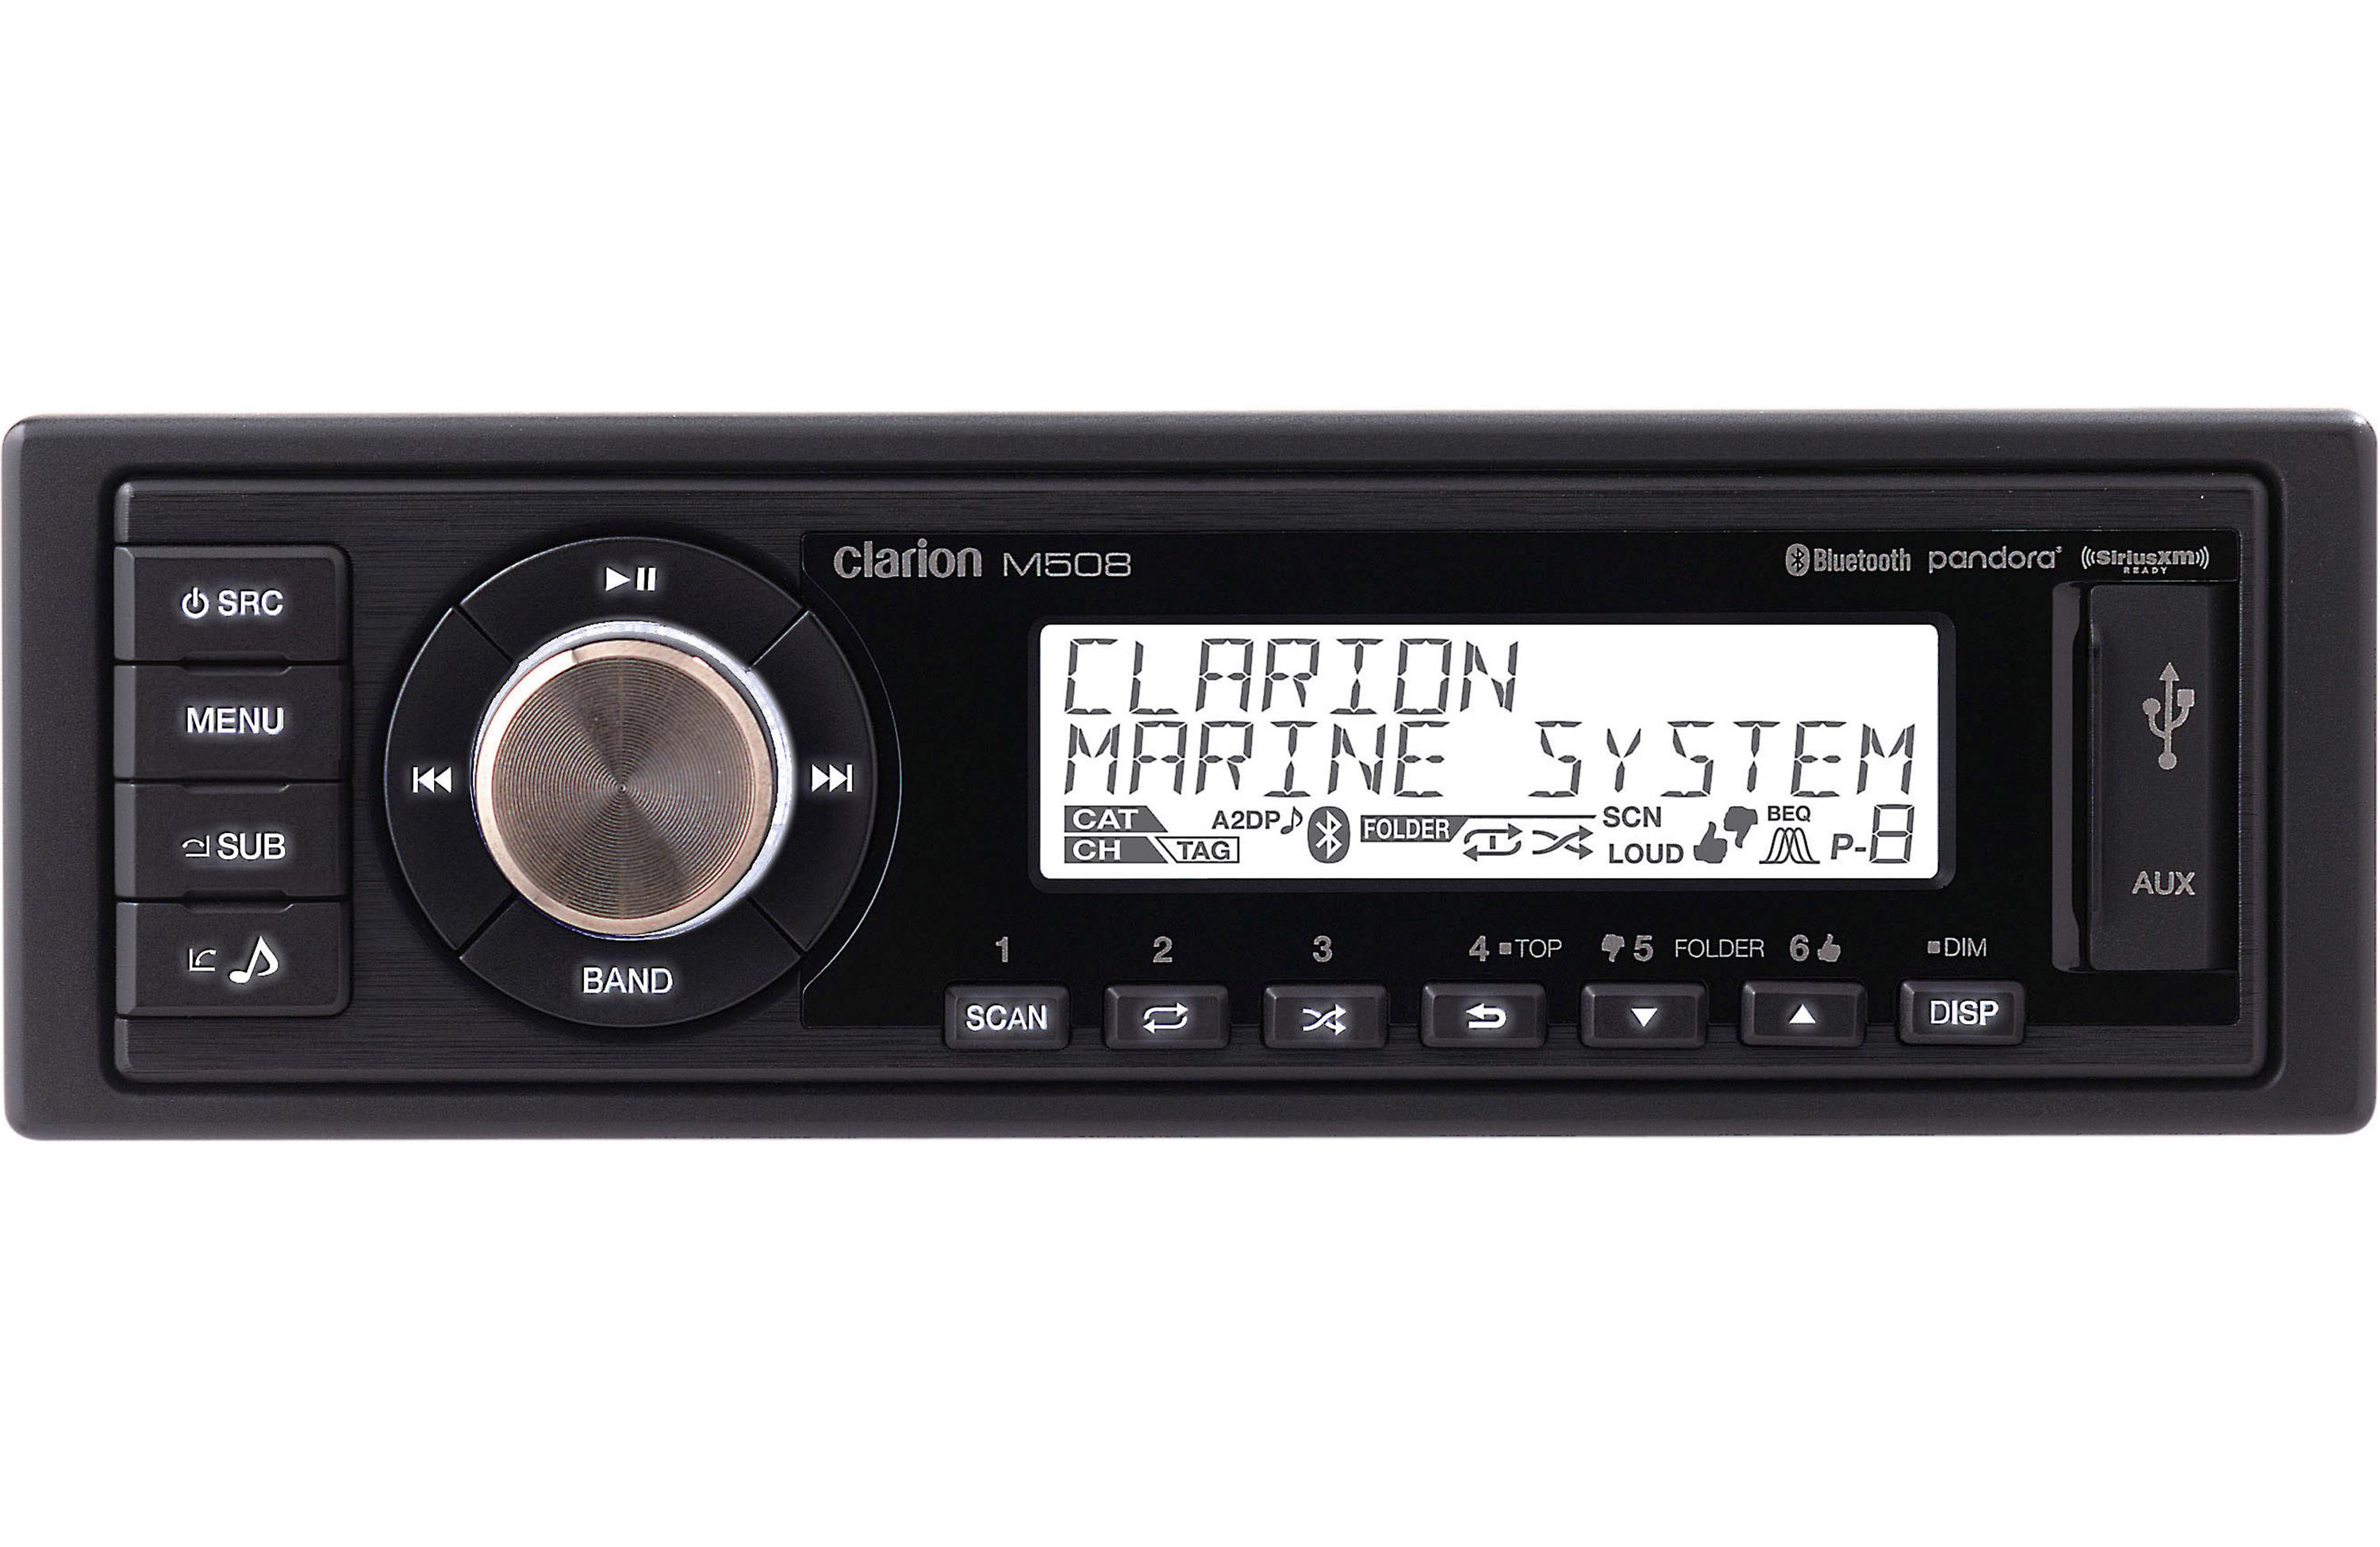 Marine AM / FM Radios - All the marine accessories and safety gear you  could want